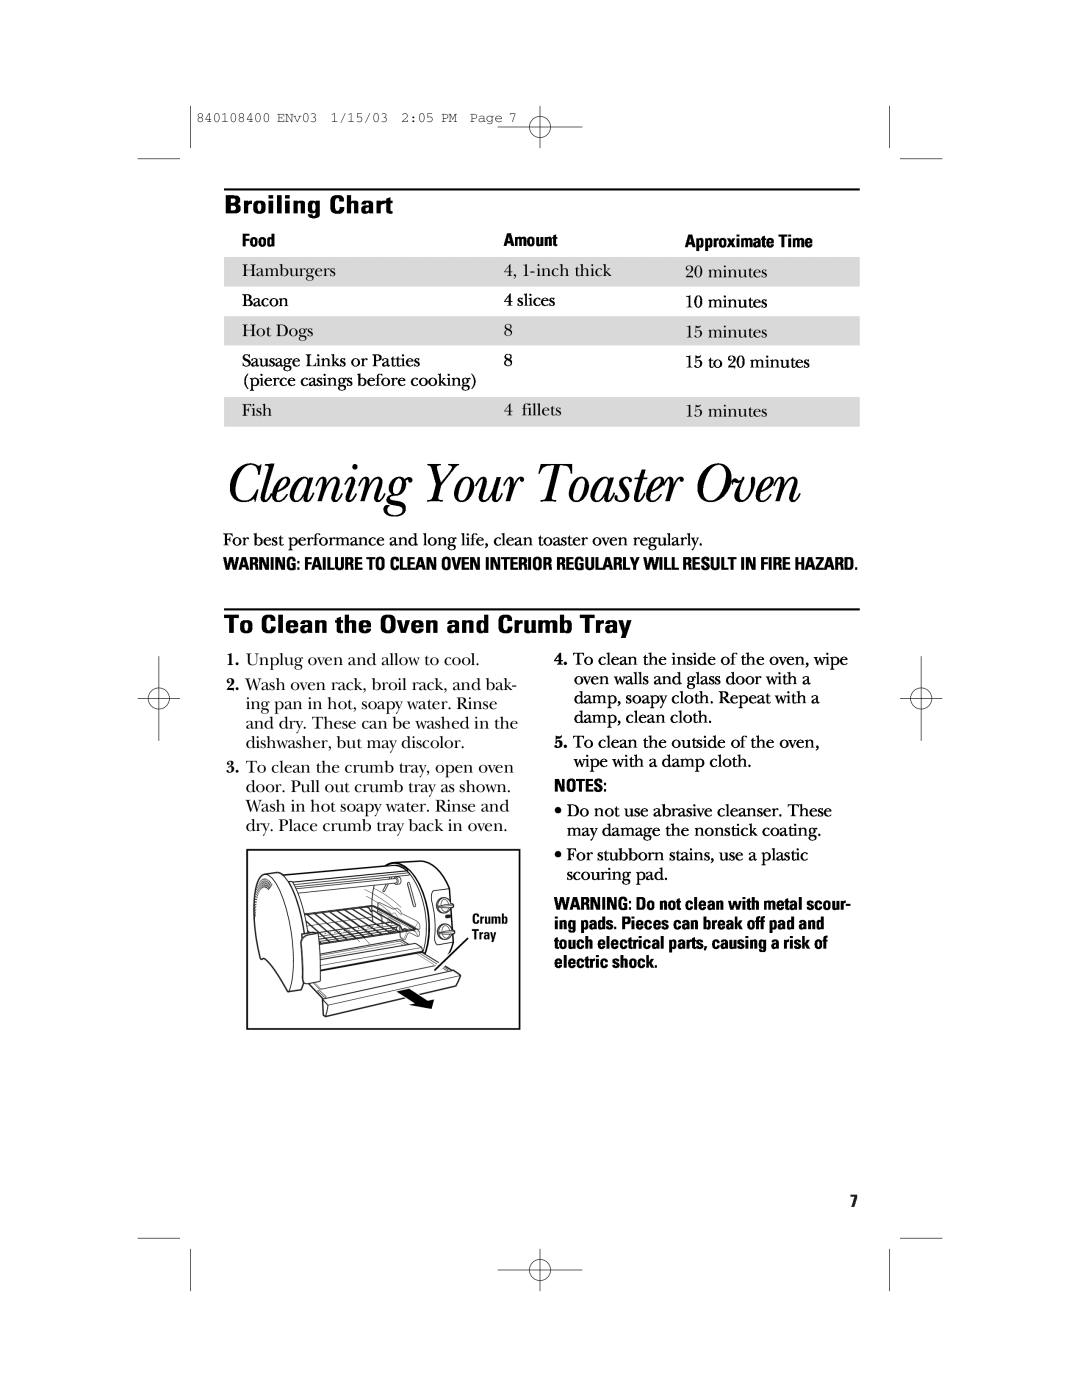 GE 168955 Cleaning Your Toaster Oven, Broiling Chart, To Clean the Oven and Crumb Tray, Food, Amount, Approximate Time 